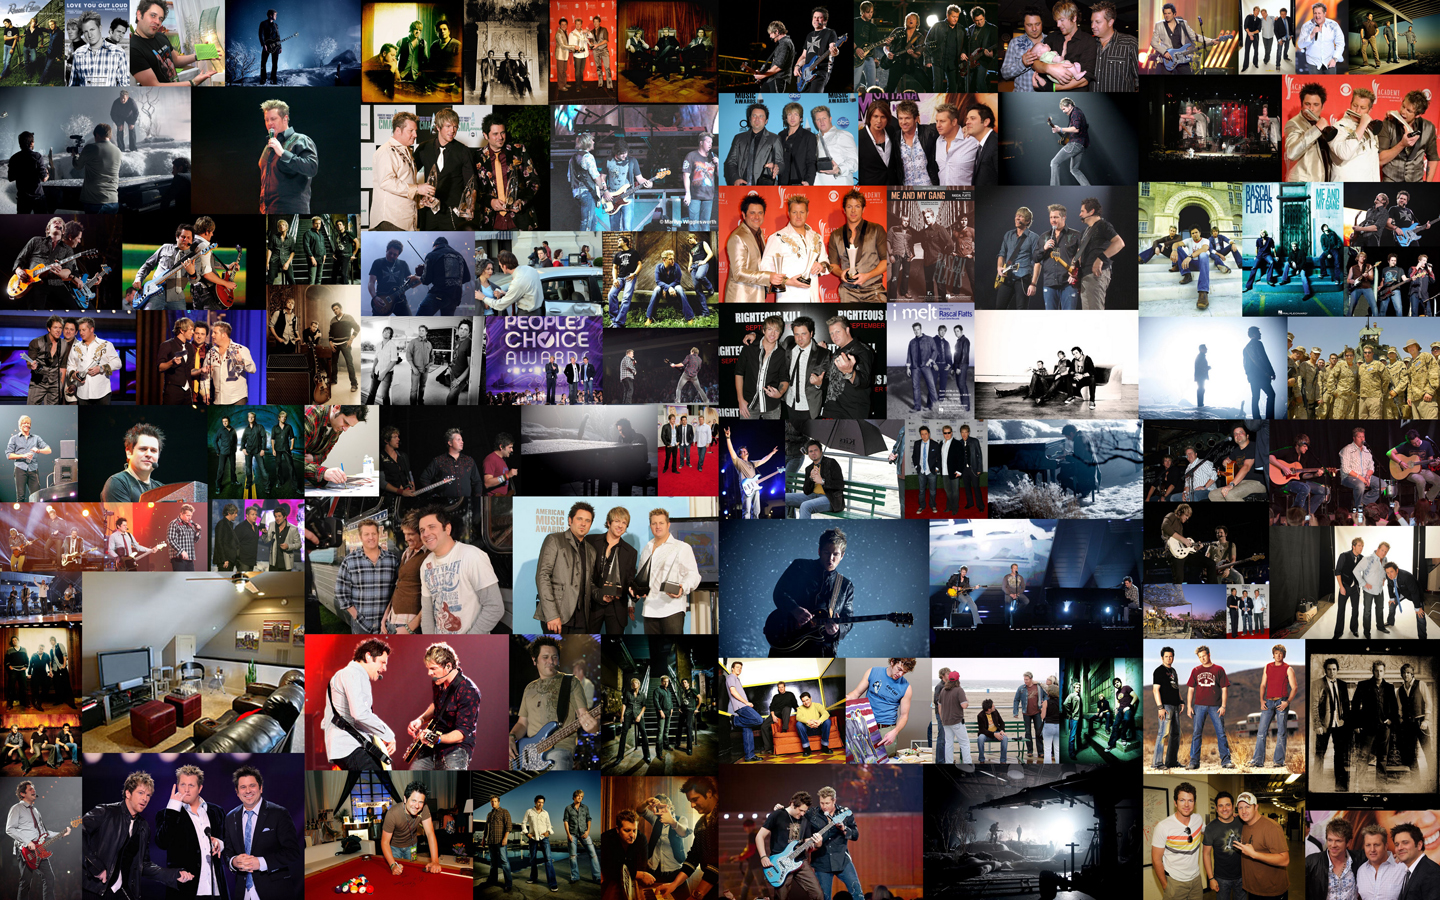  netrascal flatts photo collage 1 wallpapers 14589 1440x900 1html